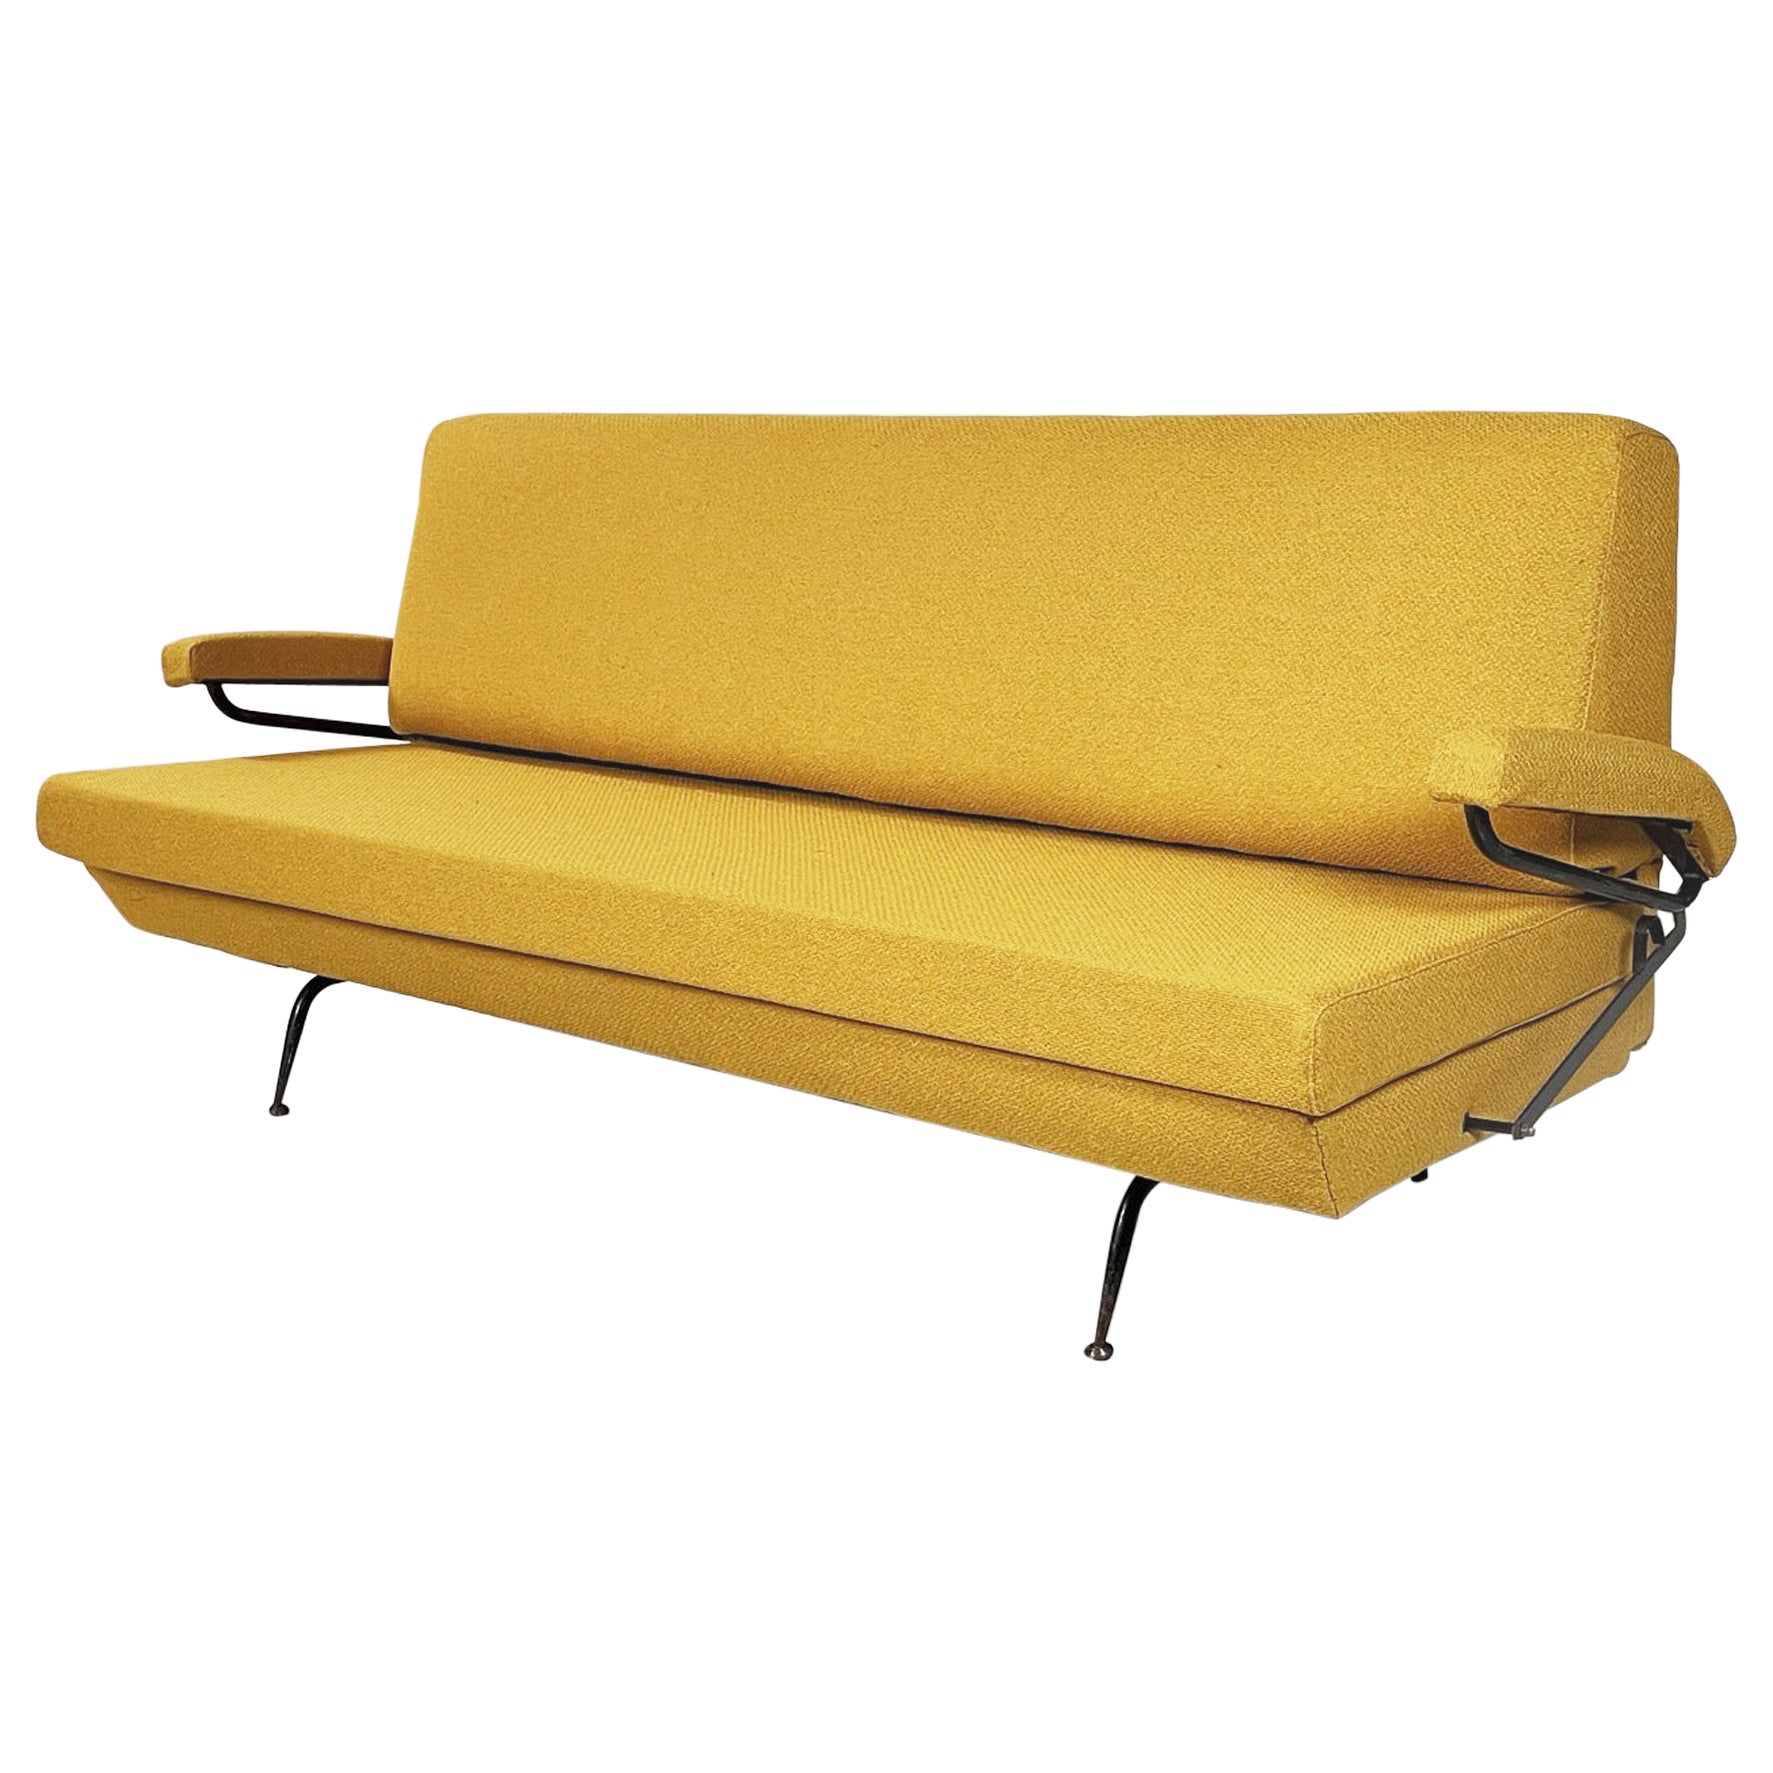 Italian Mid-Century Modern Sofa and Bed in Yellow Fabric and Black Metal, 1960s